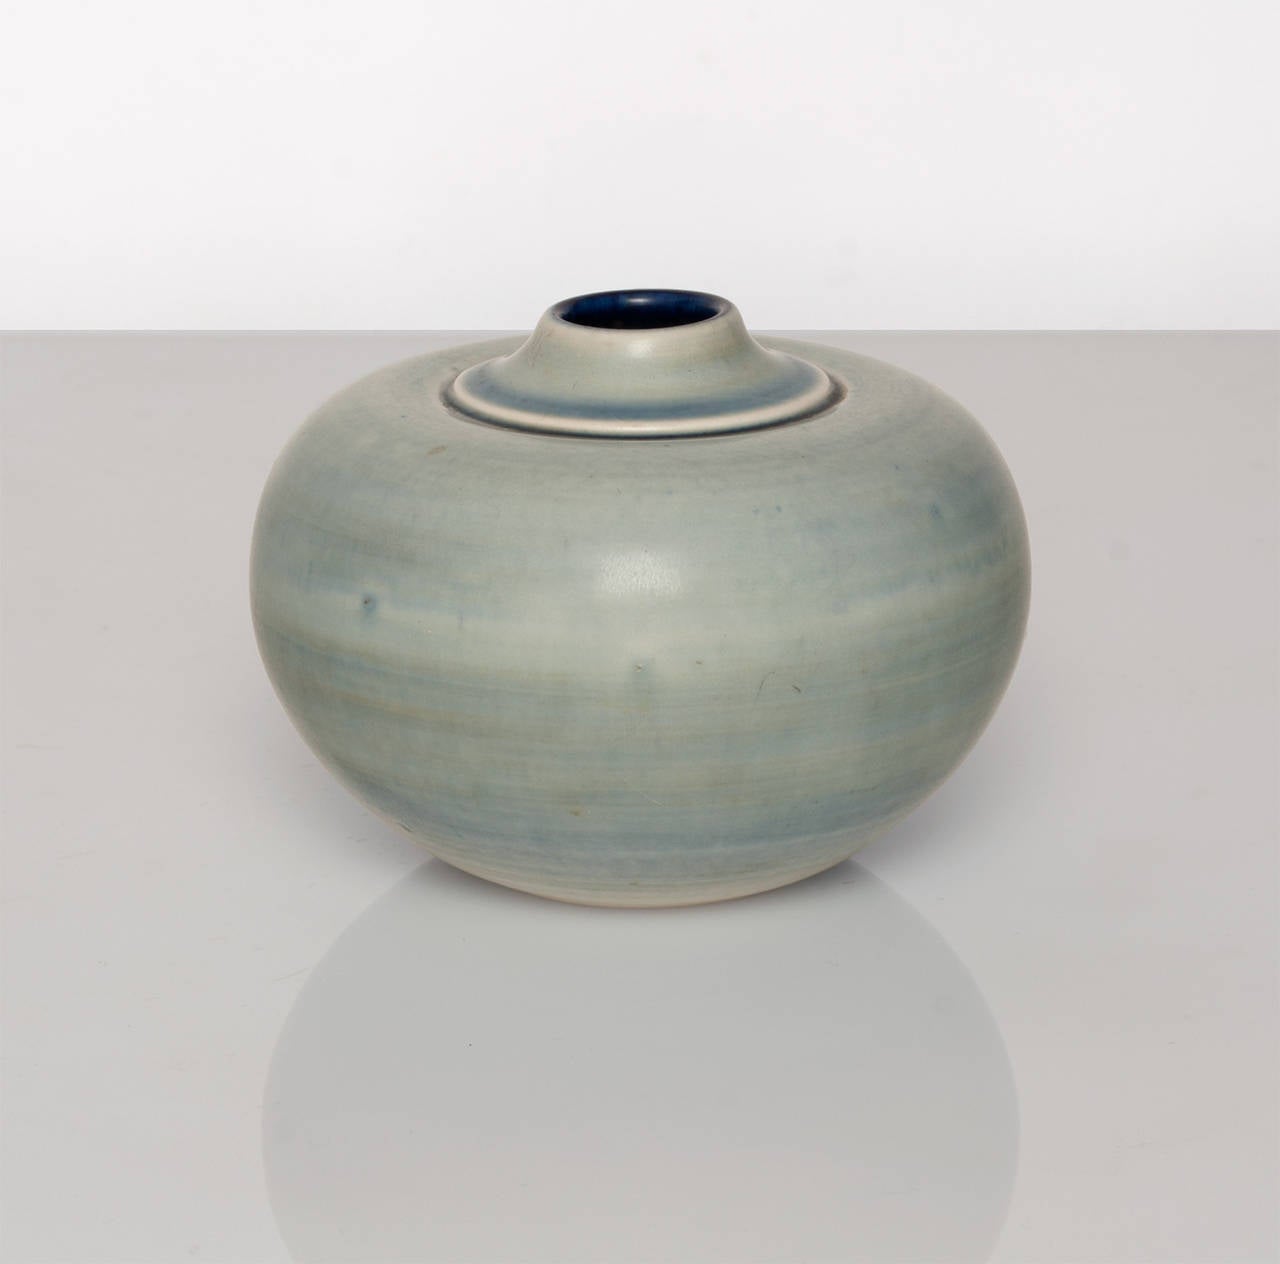 Unique Swedish art deco vase with warm blue and gray-green glaze. Made by Gertrud Lönegren at Rorstrand circa 1937-1942.
Diameter: 5